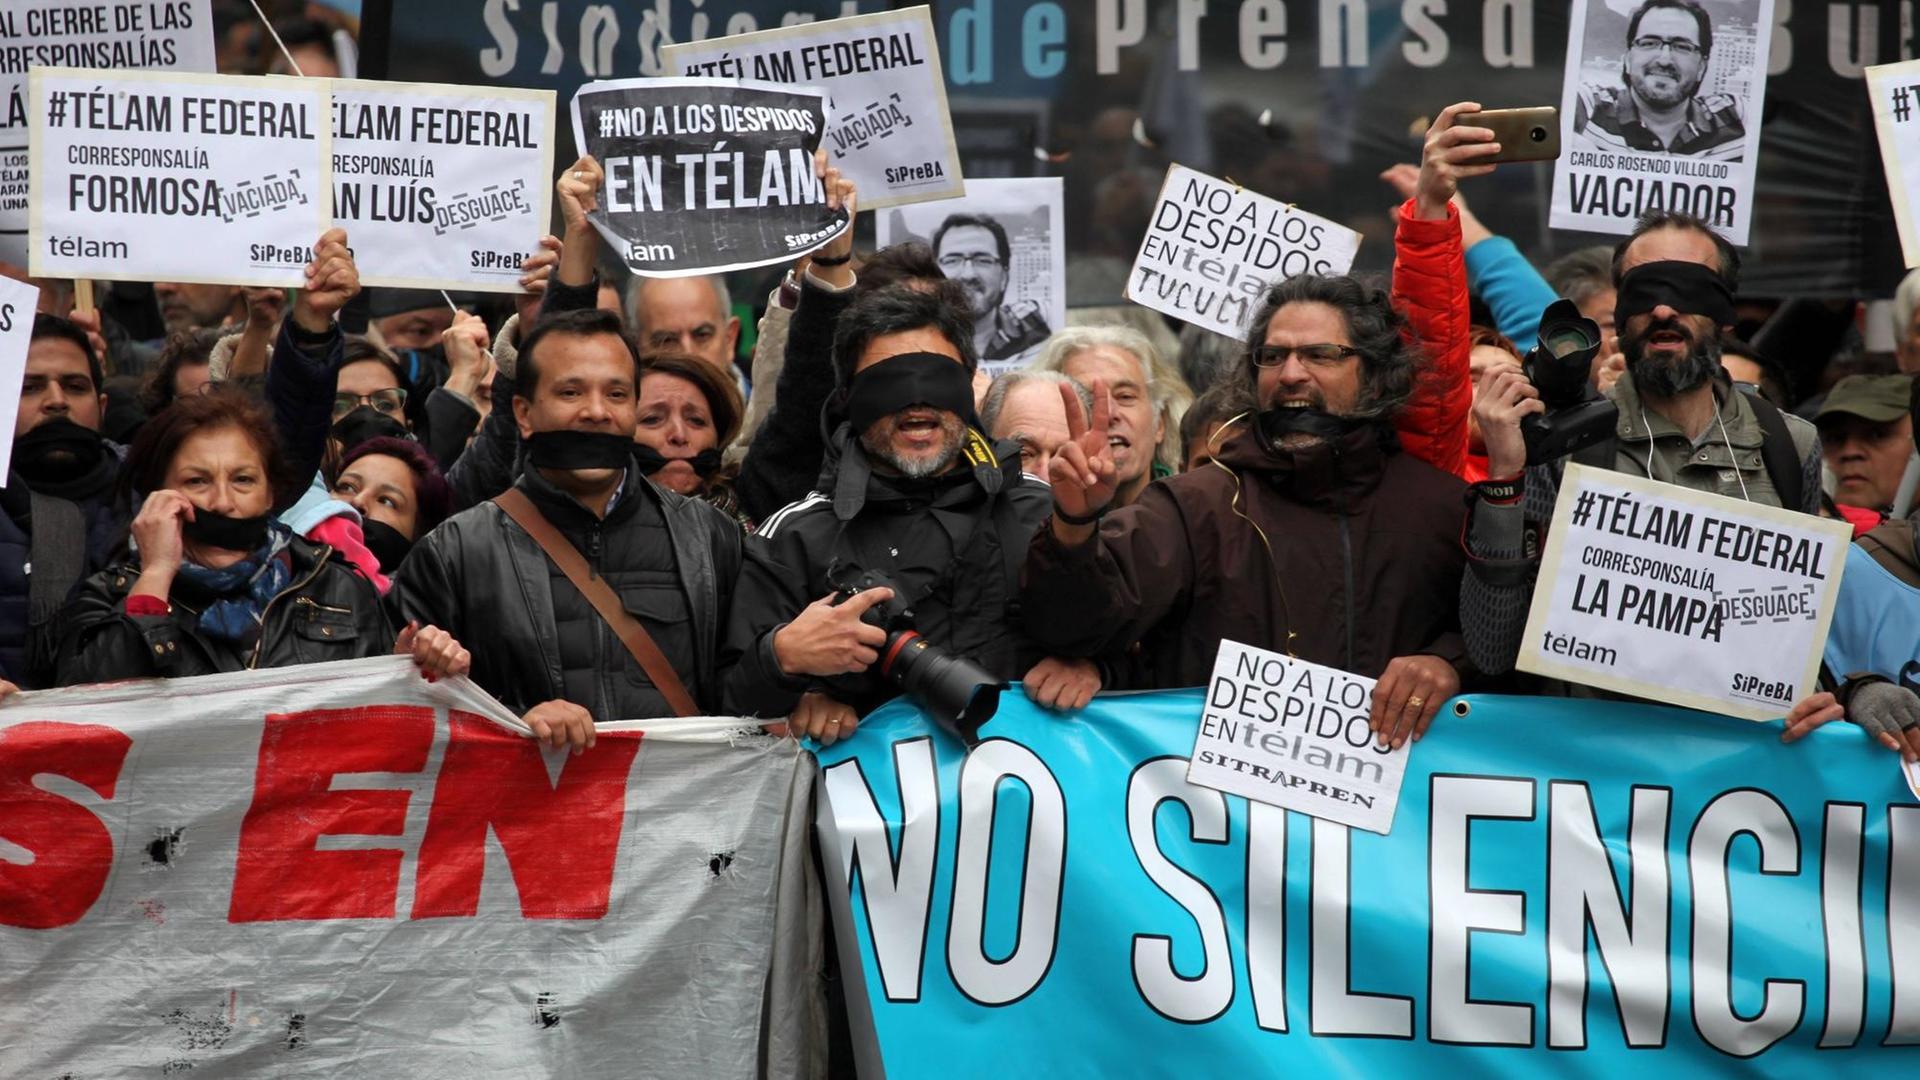 Argentinien, Demo gegen Entlassungen bei der Nationalen Nachrichtenagentur Télam in Buenos Aires July 5, 2018 - Buenos Aires, Buenos Aires, Argentina - Telam, Argentina s national news agency, created in 1945, has dismissed 357 employees, almost 40 percent of its total personnel. Today, press workers and dismissed employees held a protest in the Downtown. Buenos Aires Argentina PUBLICATIONxINxGERxSUIxAUTxONLY - ZUMAs180 20180705_zbp_s180_006 Copyright: xClaudioxSantistebanx